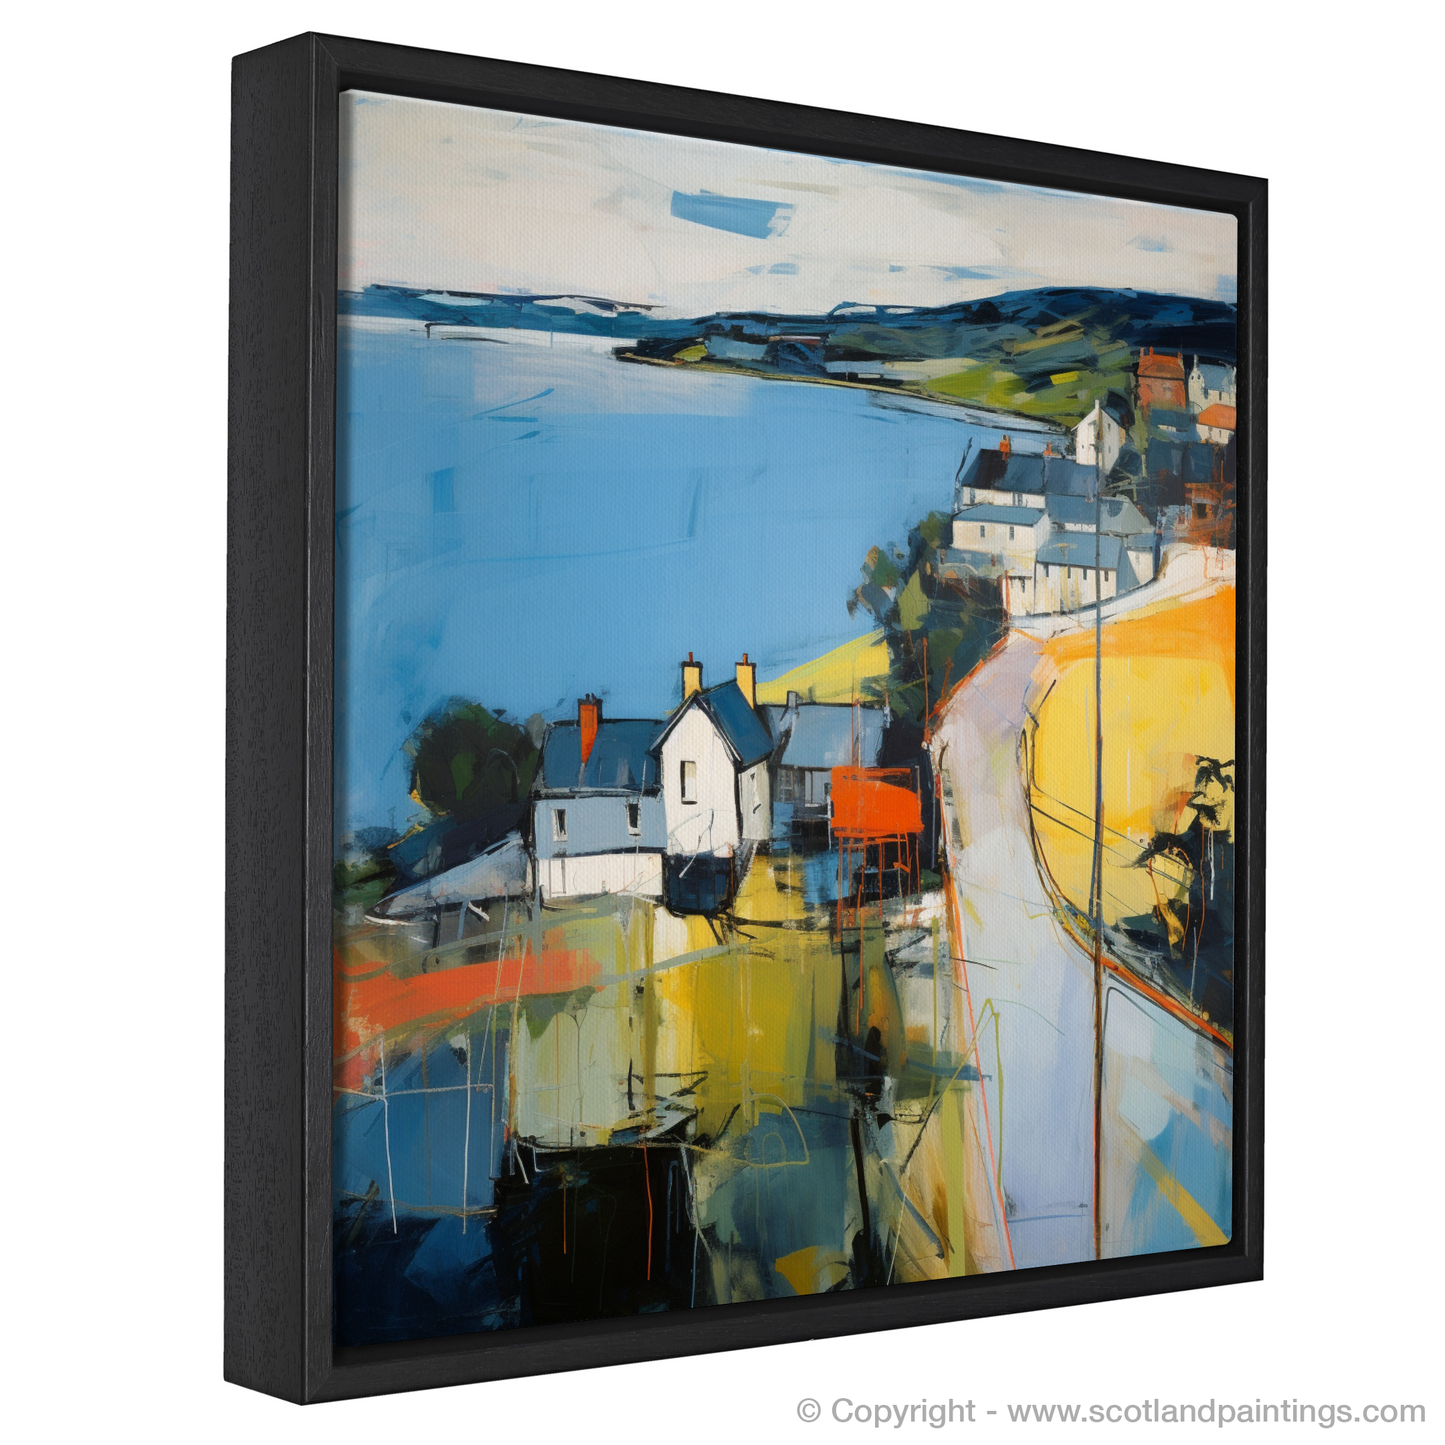 West Coast Whispers: Oban, Argyll and Bute through Abstract Impressionism